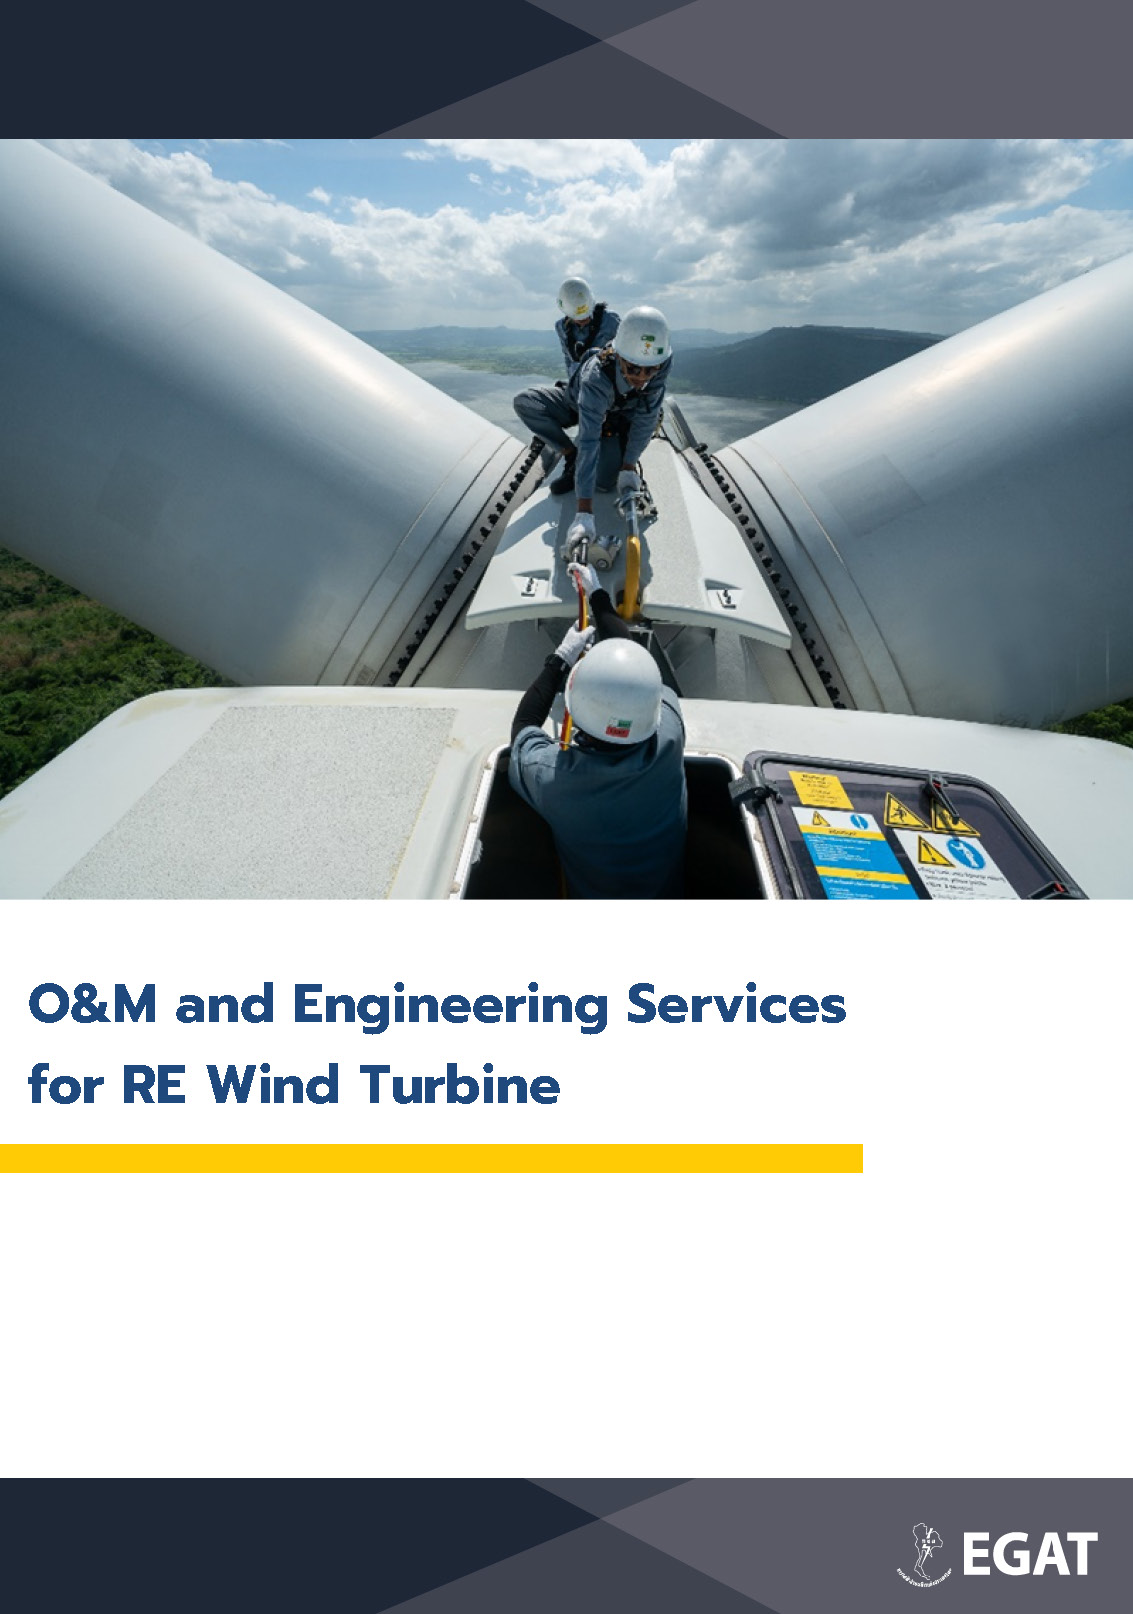 O&M and Engineering Services for RE Wind Turbine